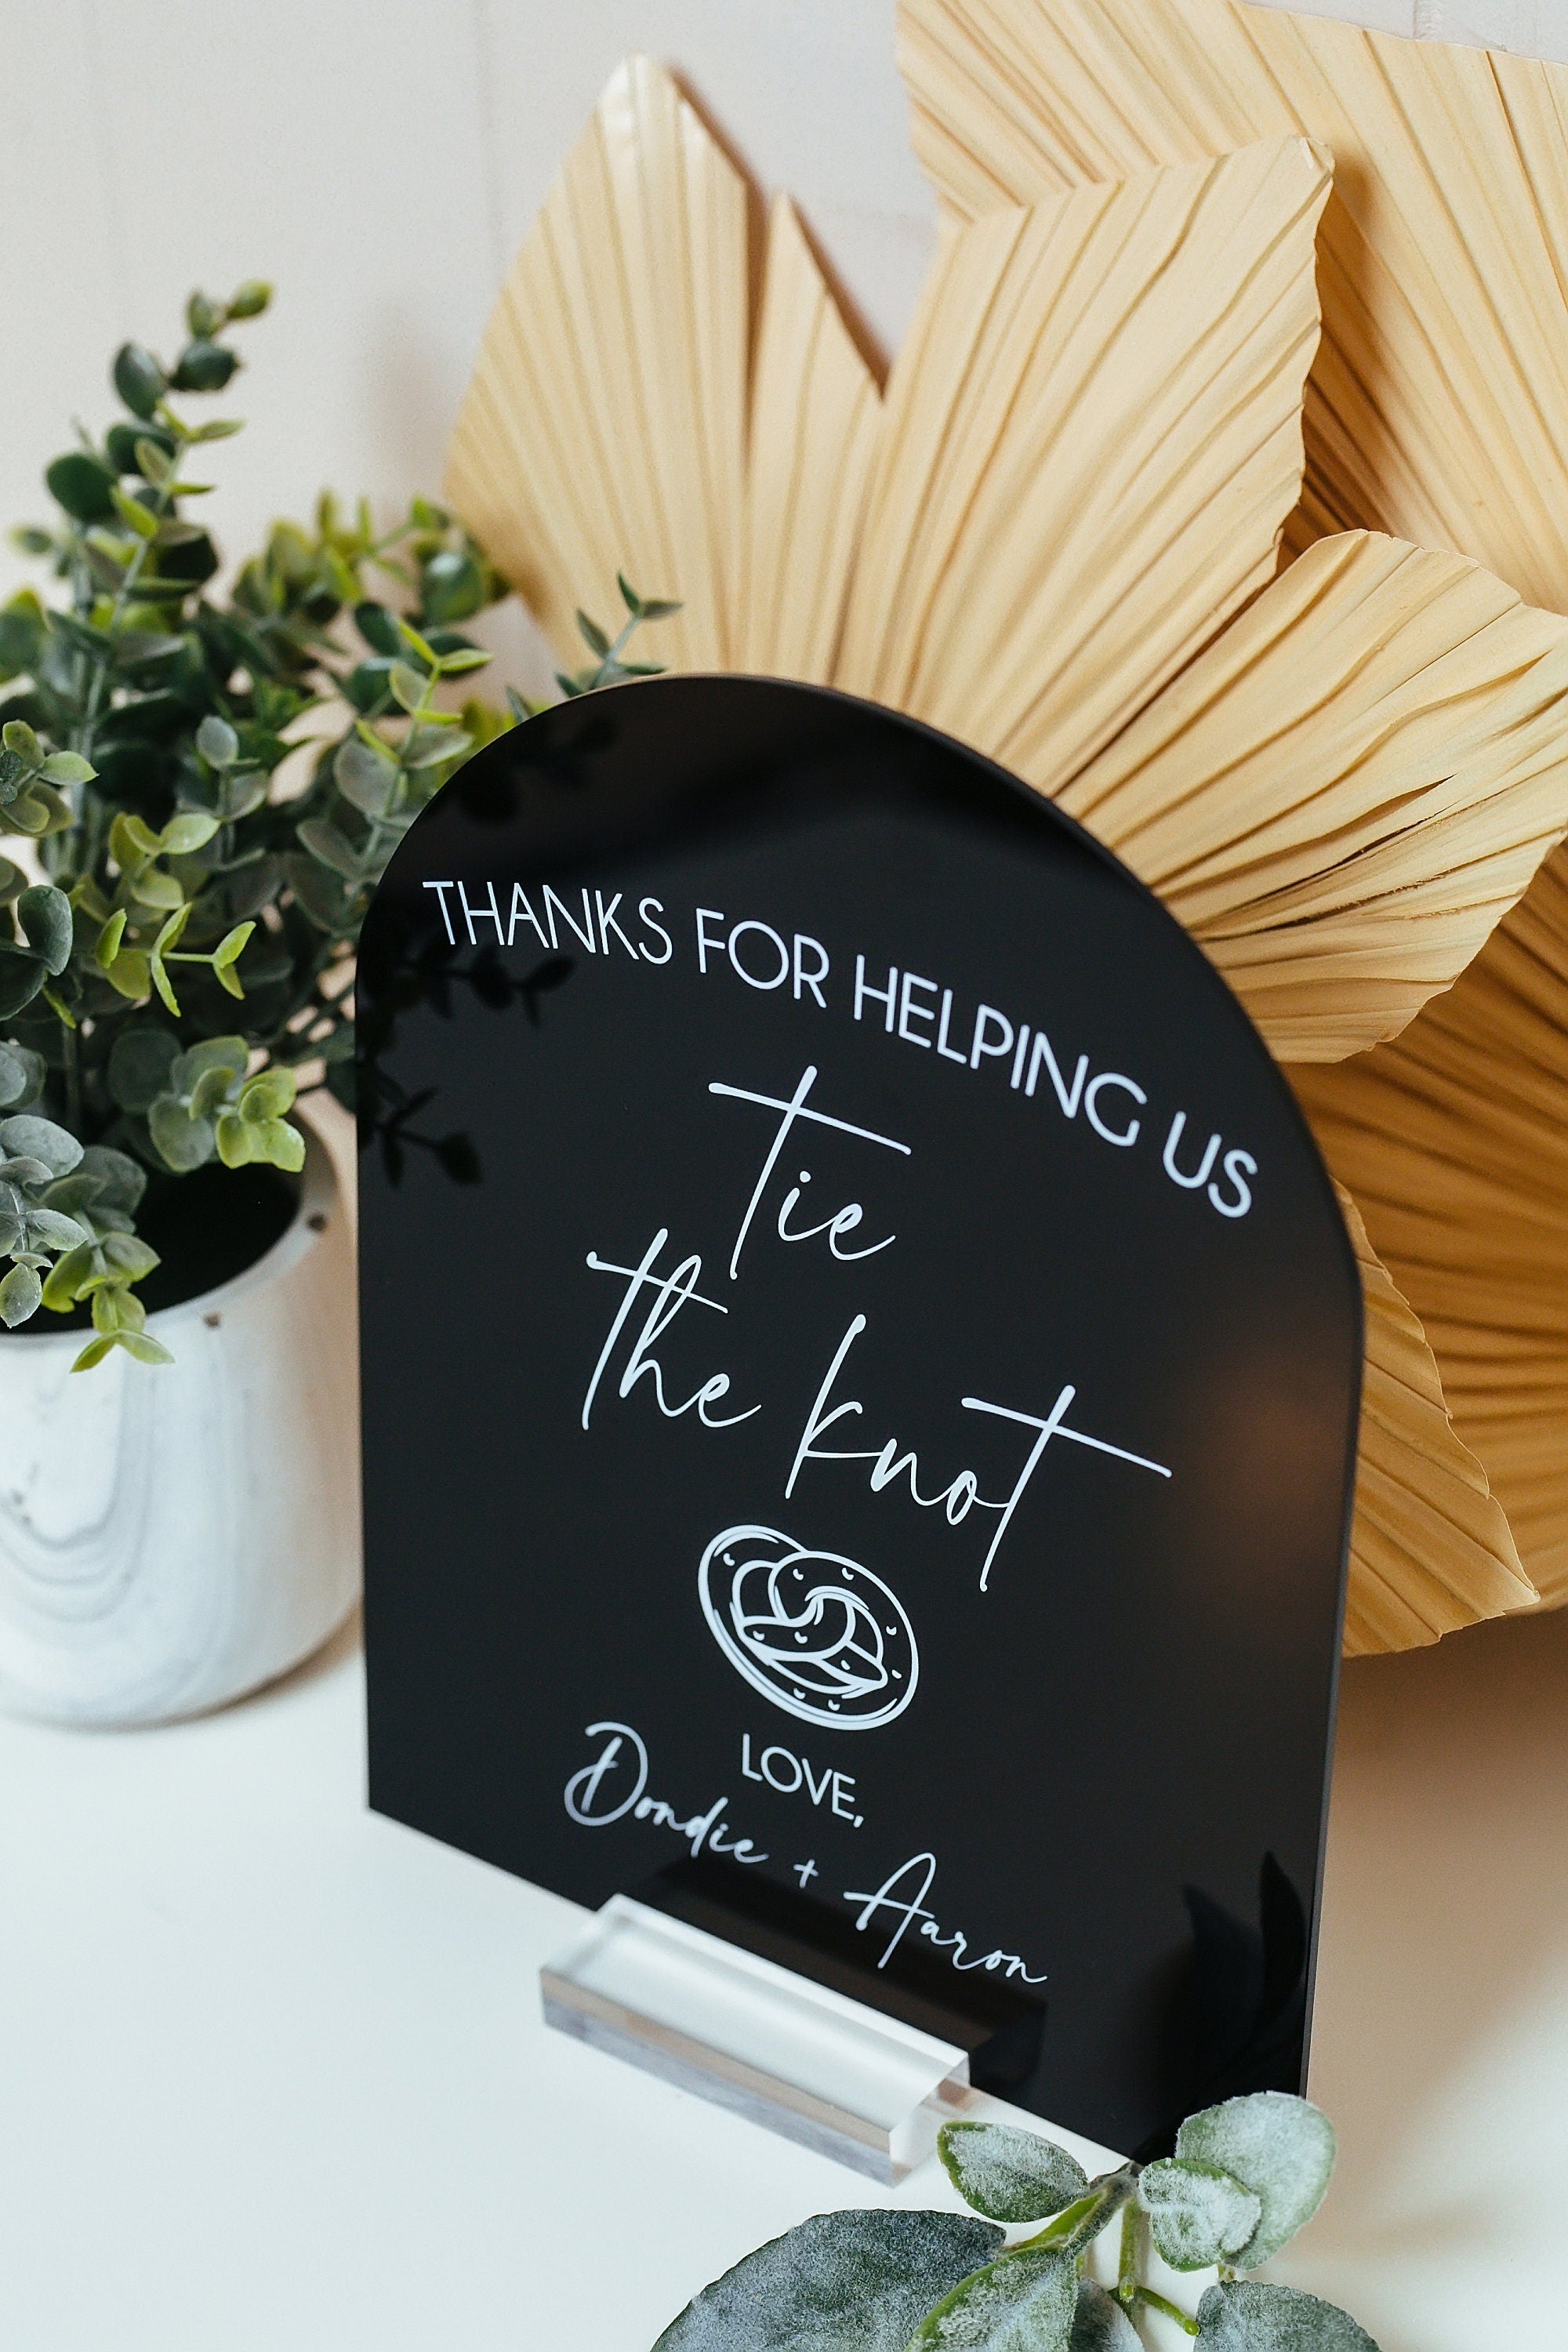 ARCH Thanks For Helping Us Tie The Knot Pretzel Favors Please Take One Clear Glass Look Acrylic Wedding Sign Plexiglass Perspex Lucite